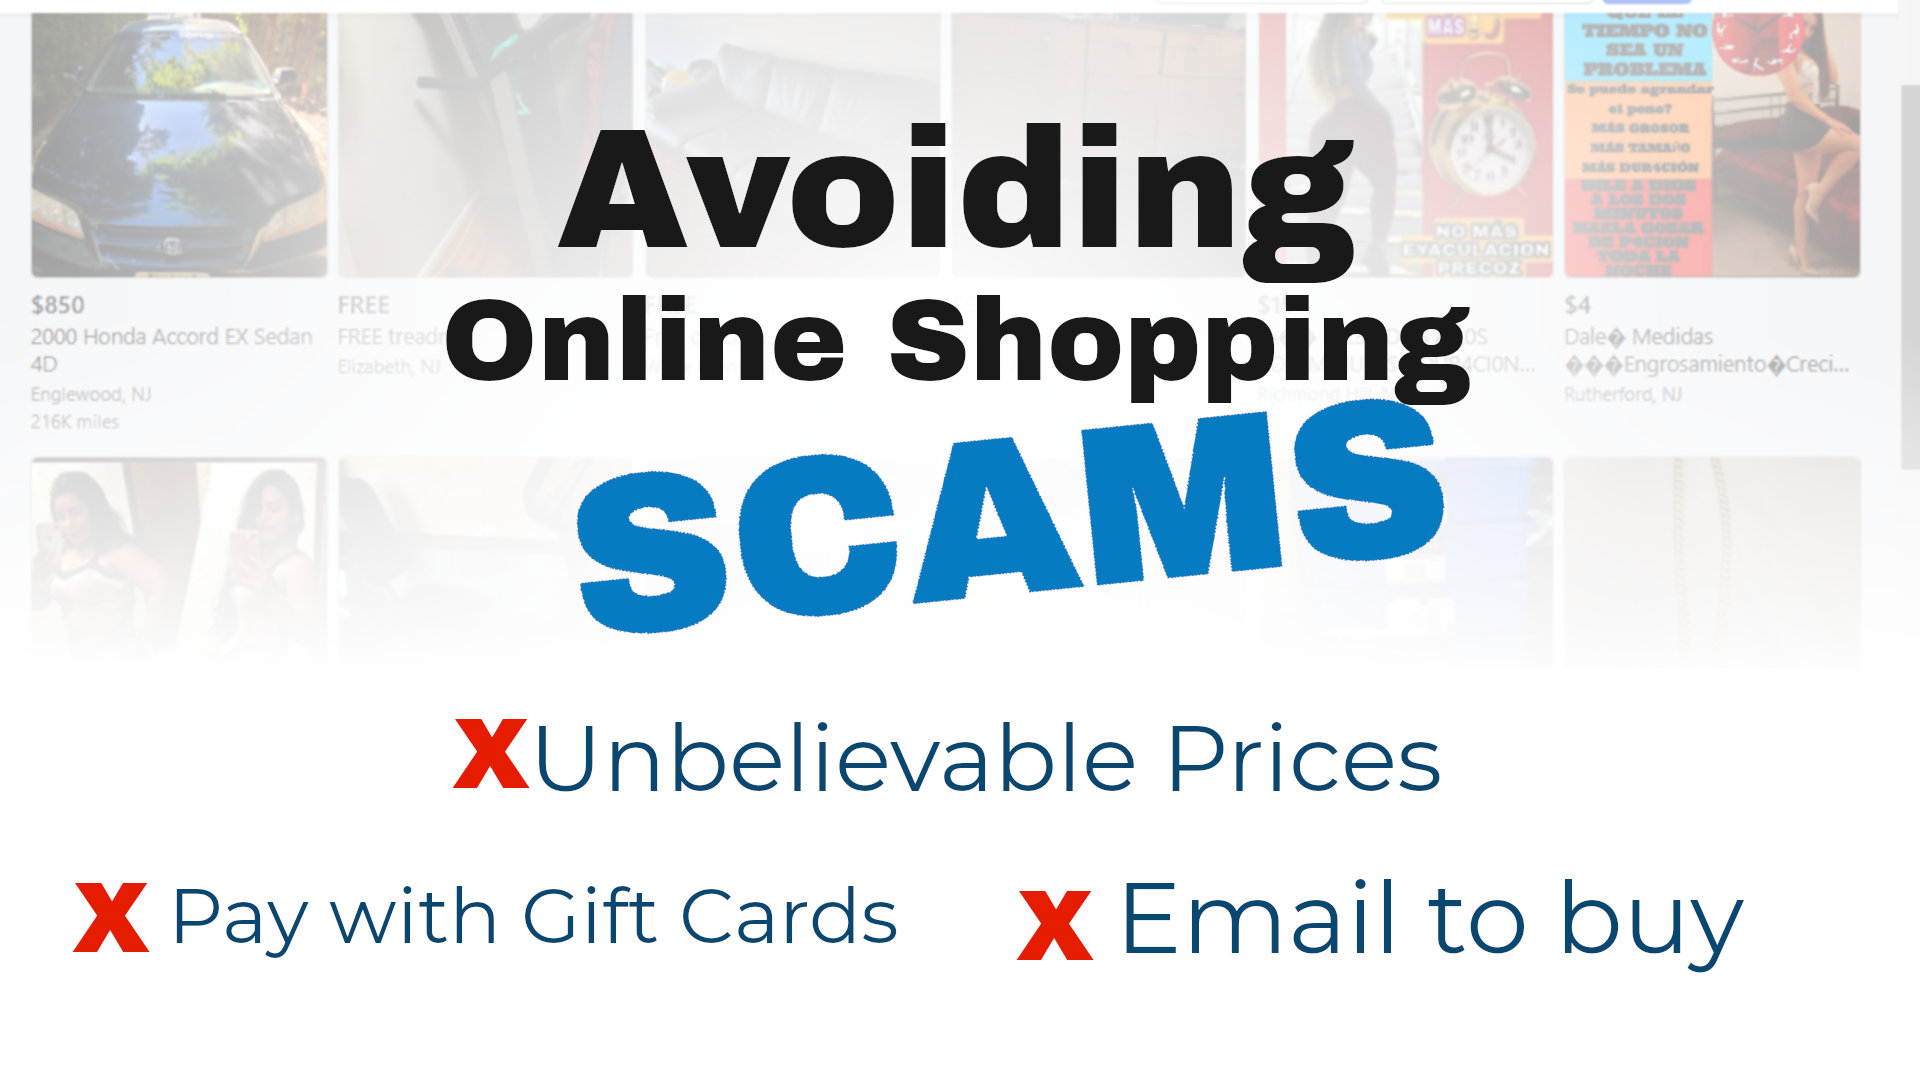 Avoiding Online Shopping Scams over an image of an online marketplace, with red x's next to each of the scam signs: Unbelievable Prices, Pay with Gift Cards, and Email to buy.